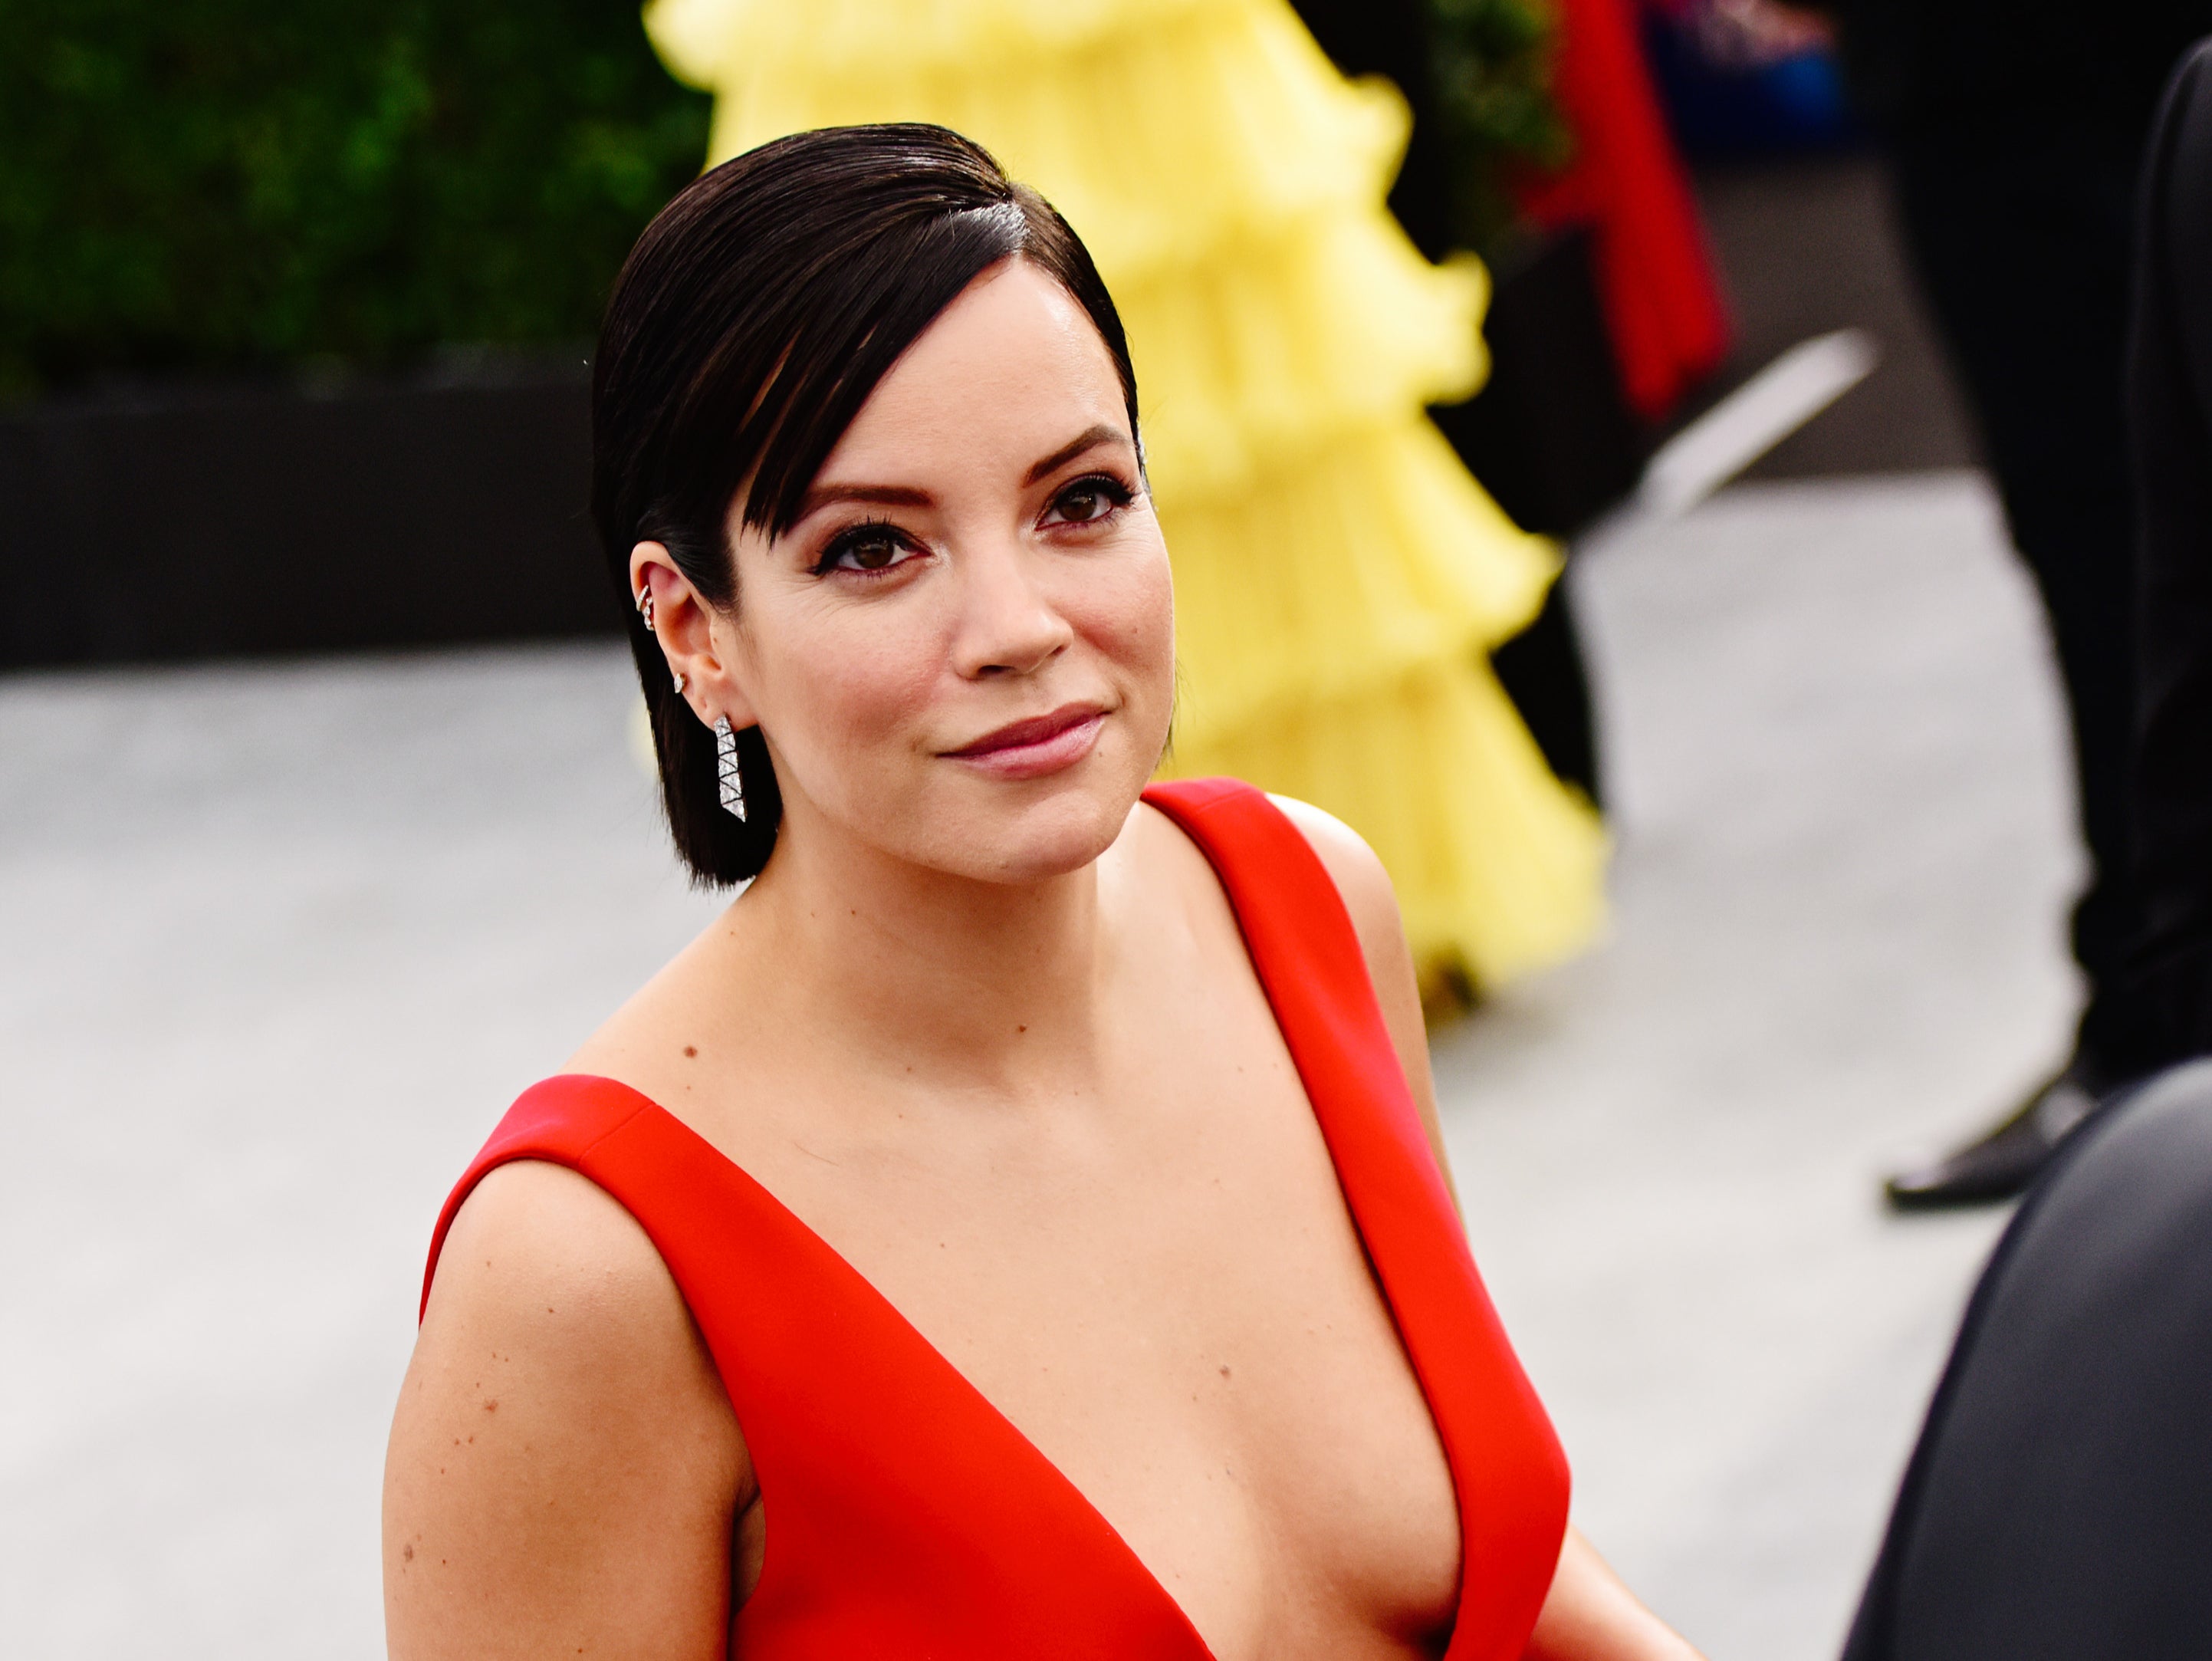 Lily Allen at the Screen Actors Guild Awards, 2020